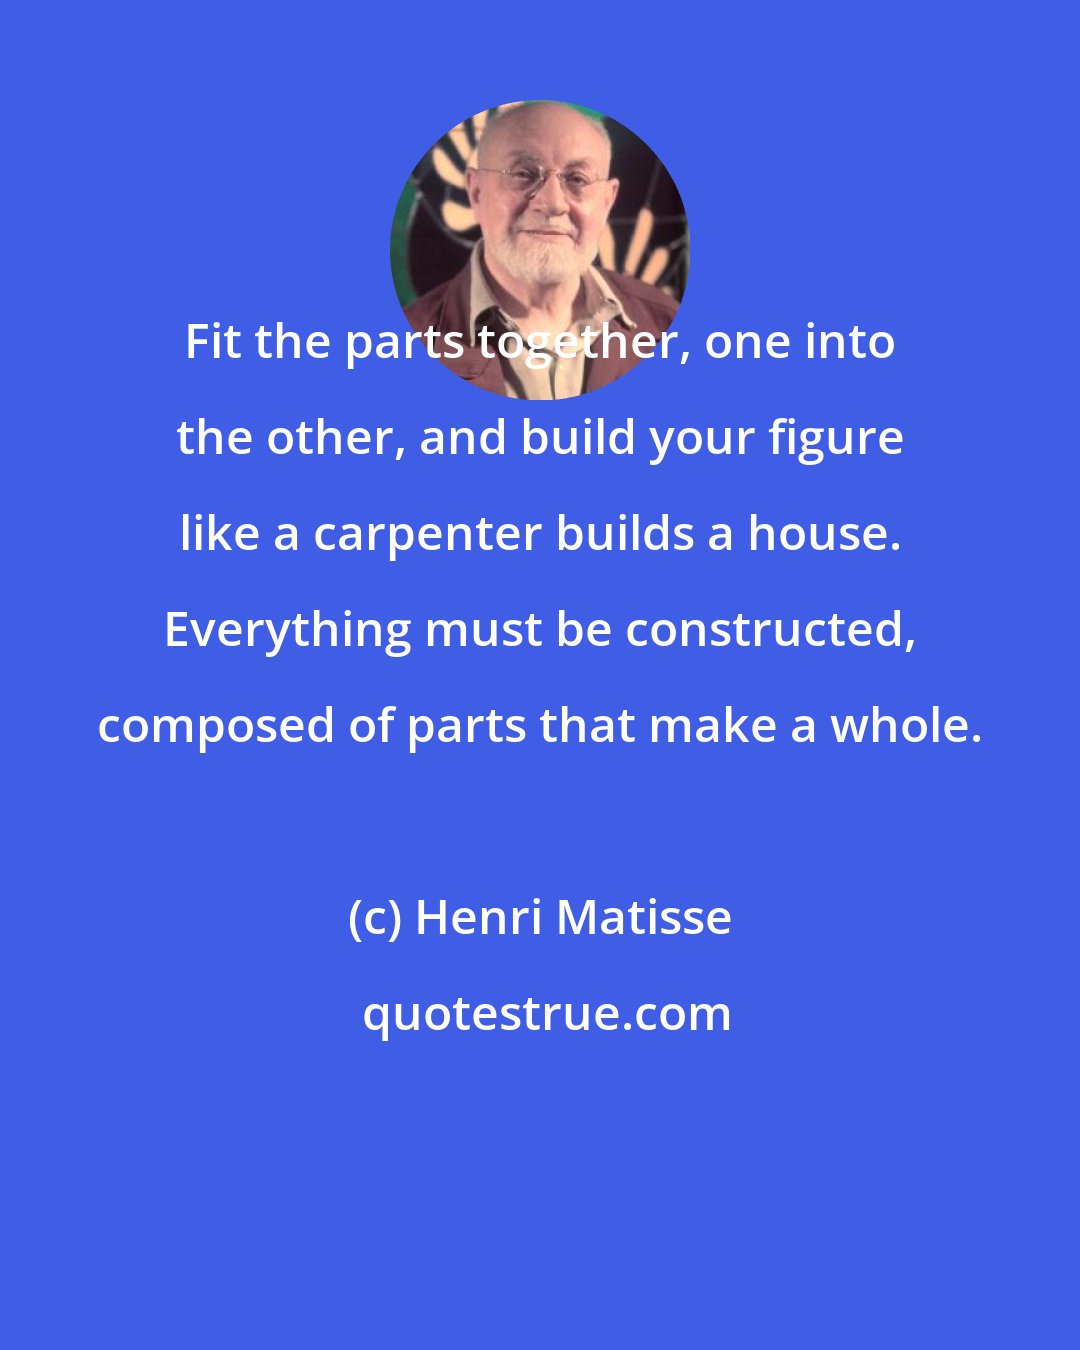 Henri Matisse: Fit the parts together, one into the other, and build your figure like a carpenter builds a house. Everything must be constructed, composed of parts that make a whole.